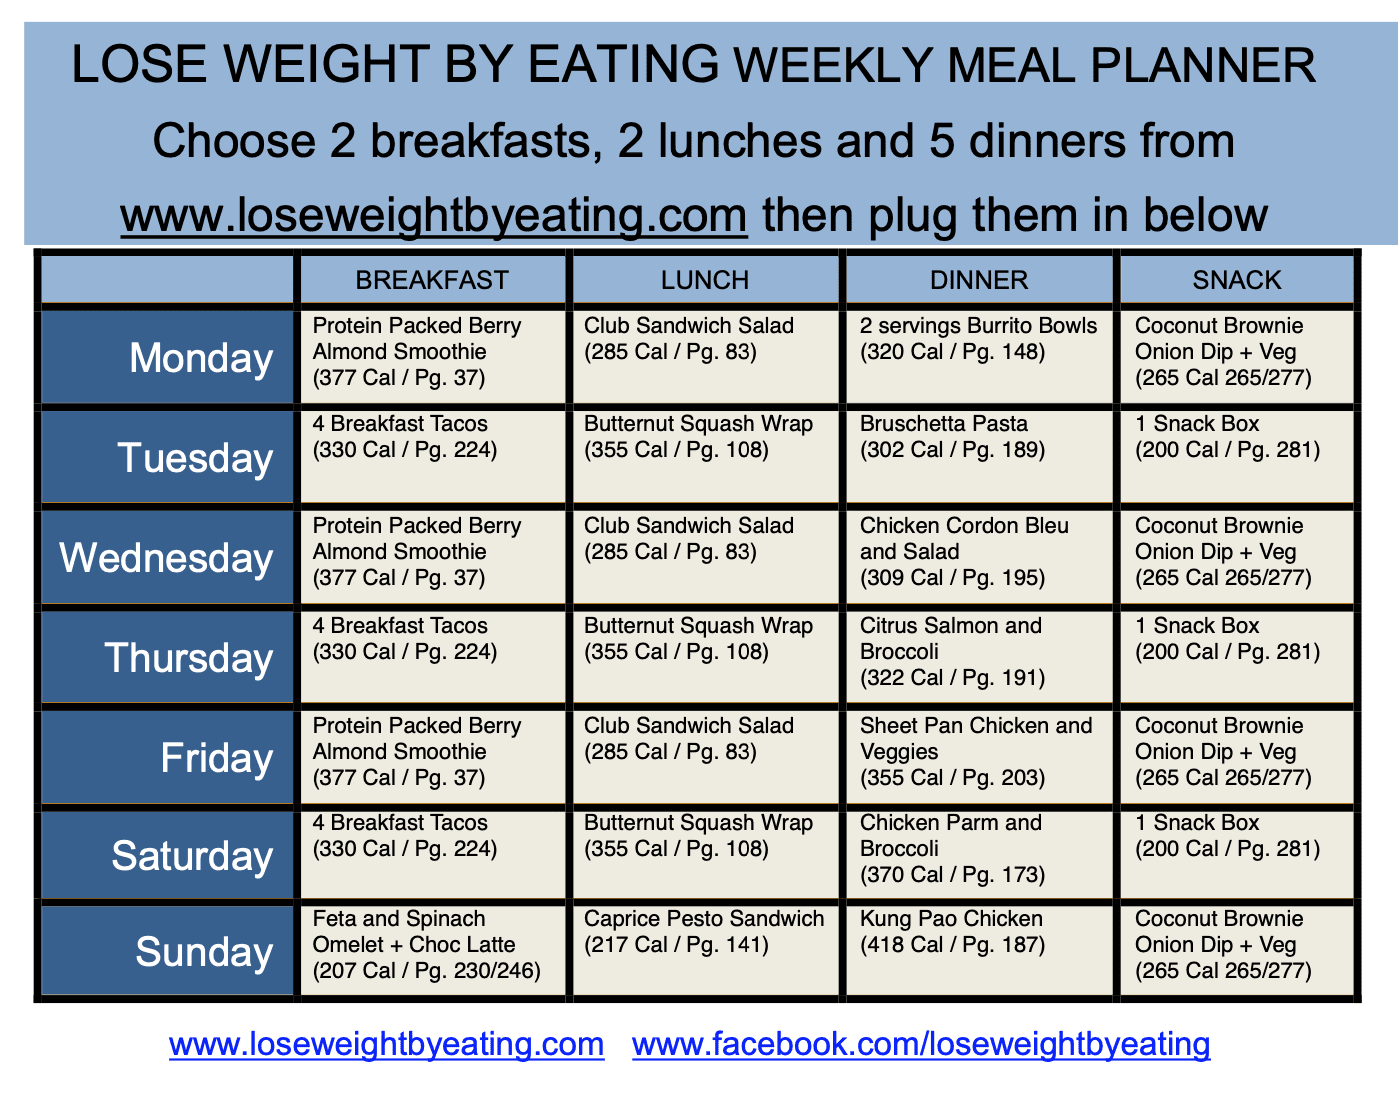 Click the photo to view the simple 1200 calorie meal plan PDF.